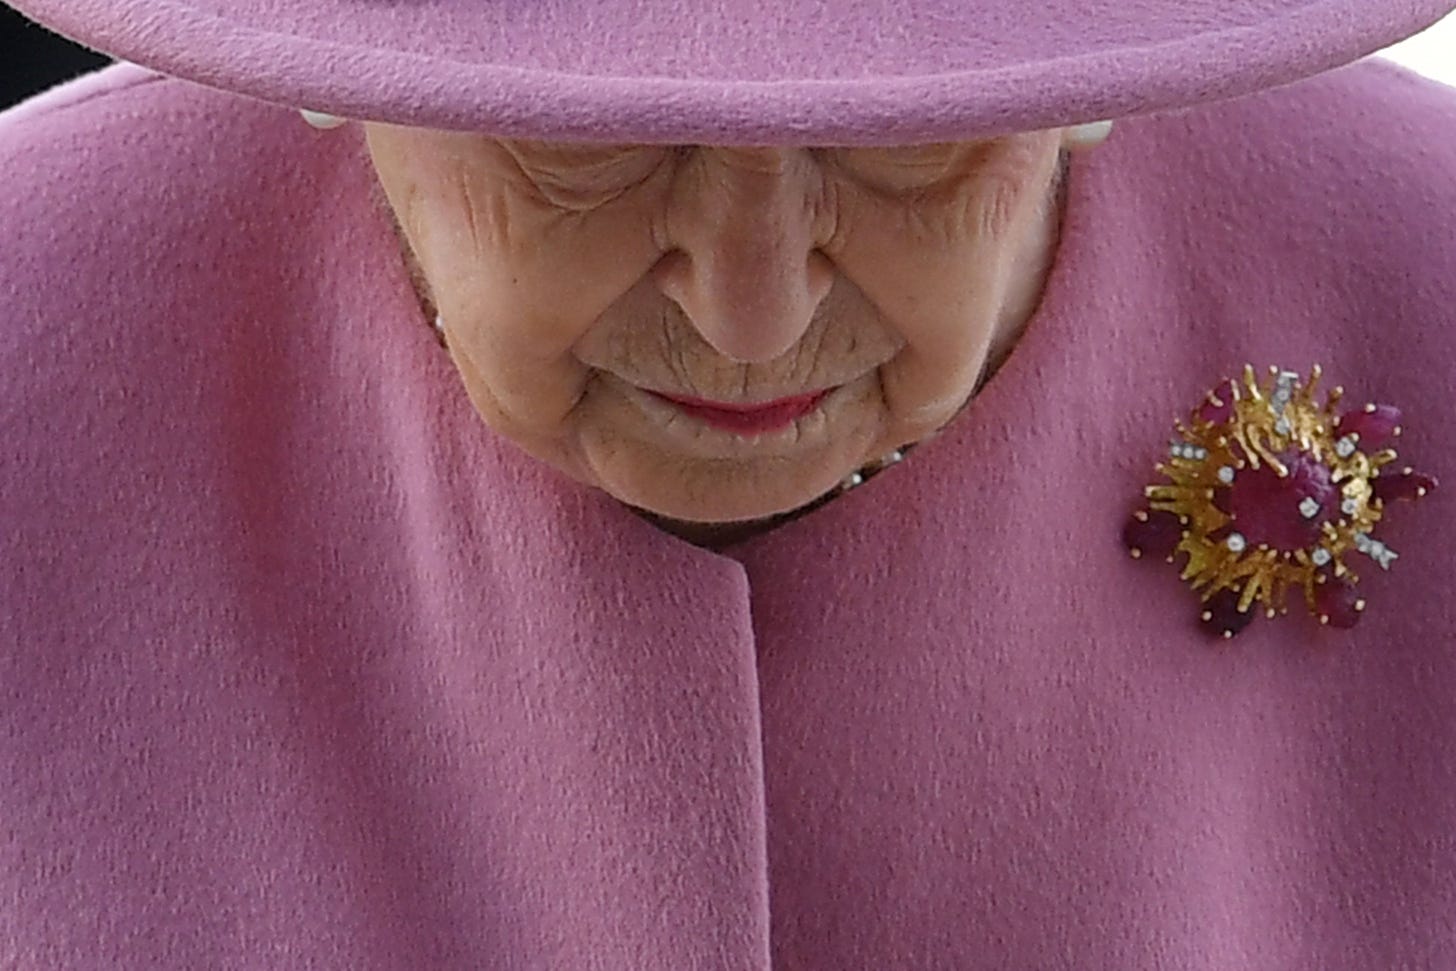 Photo of the Queen looking down wearing pink hat and coat